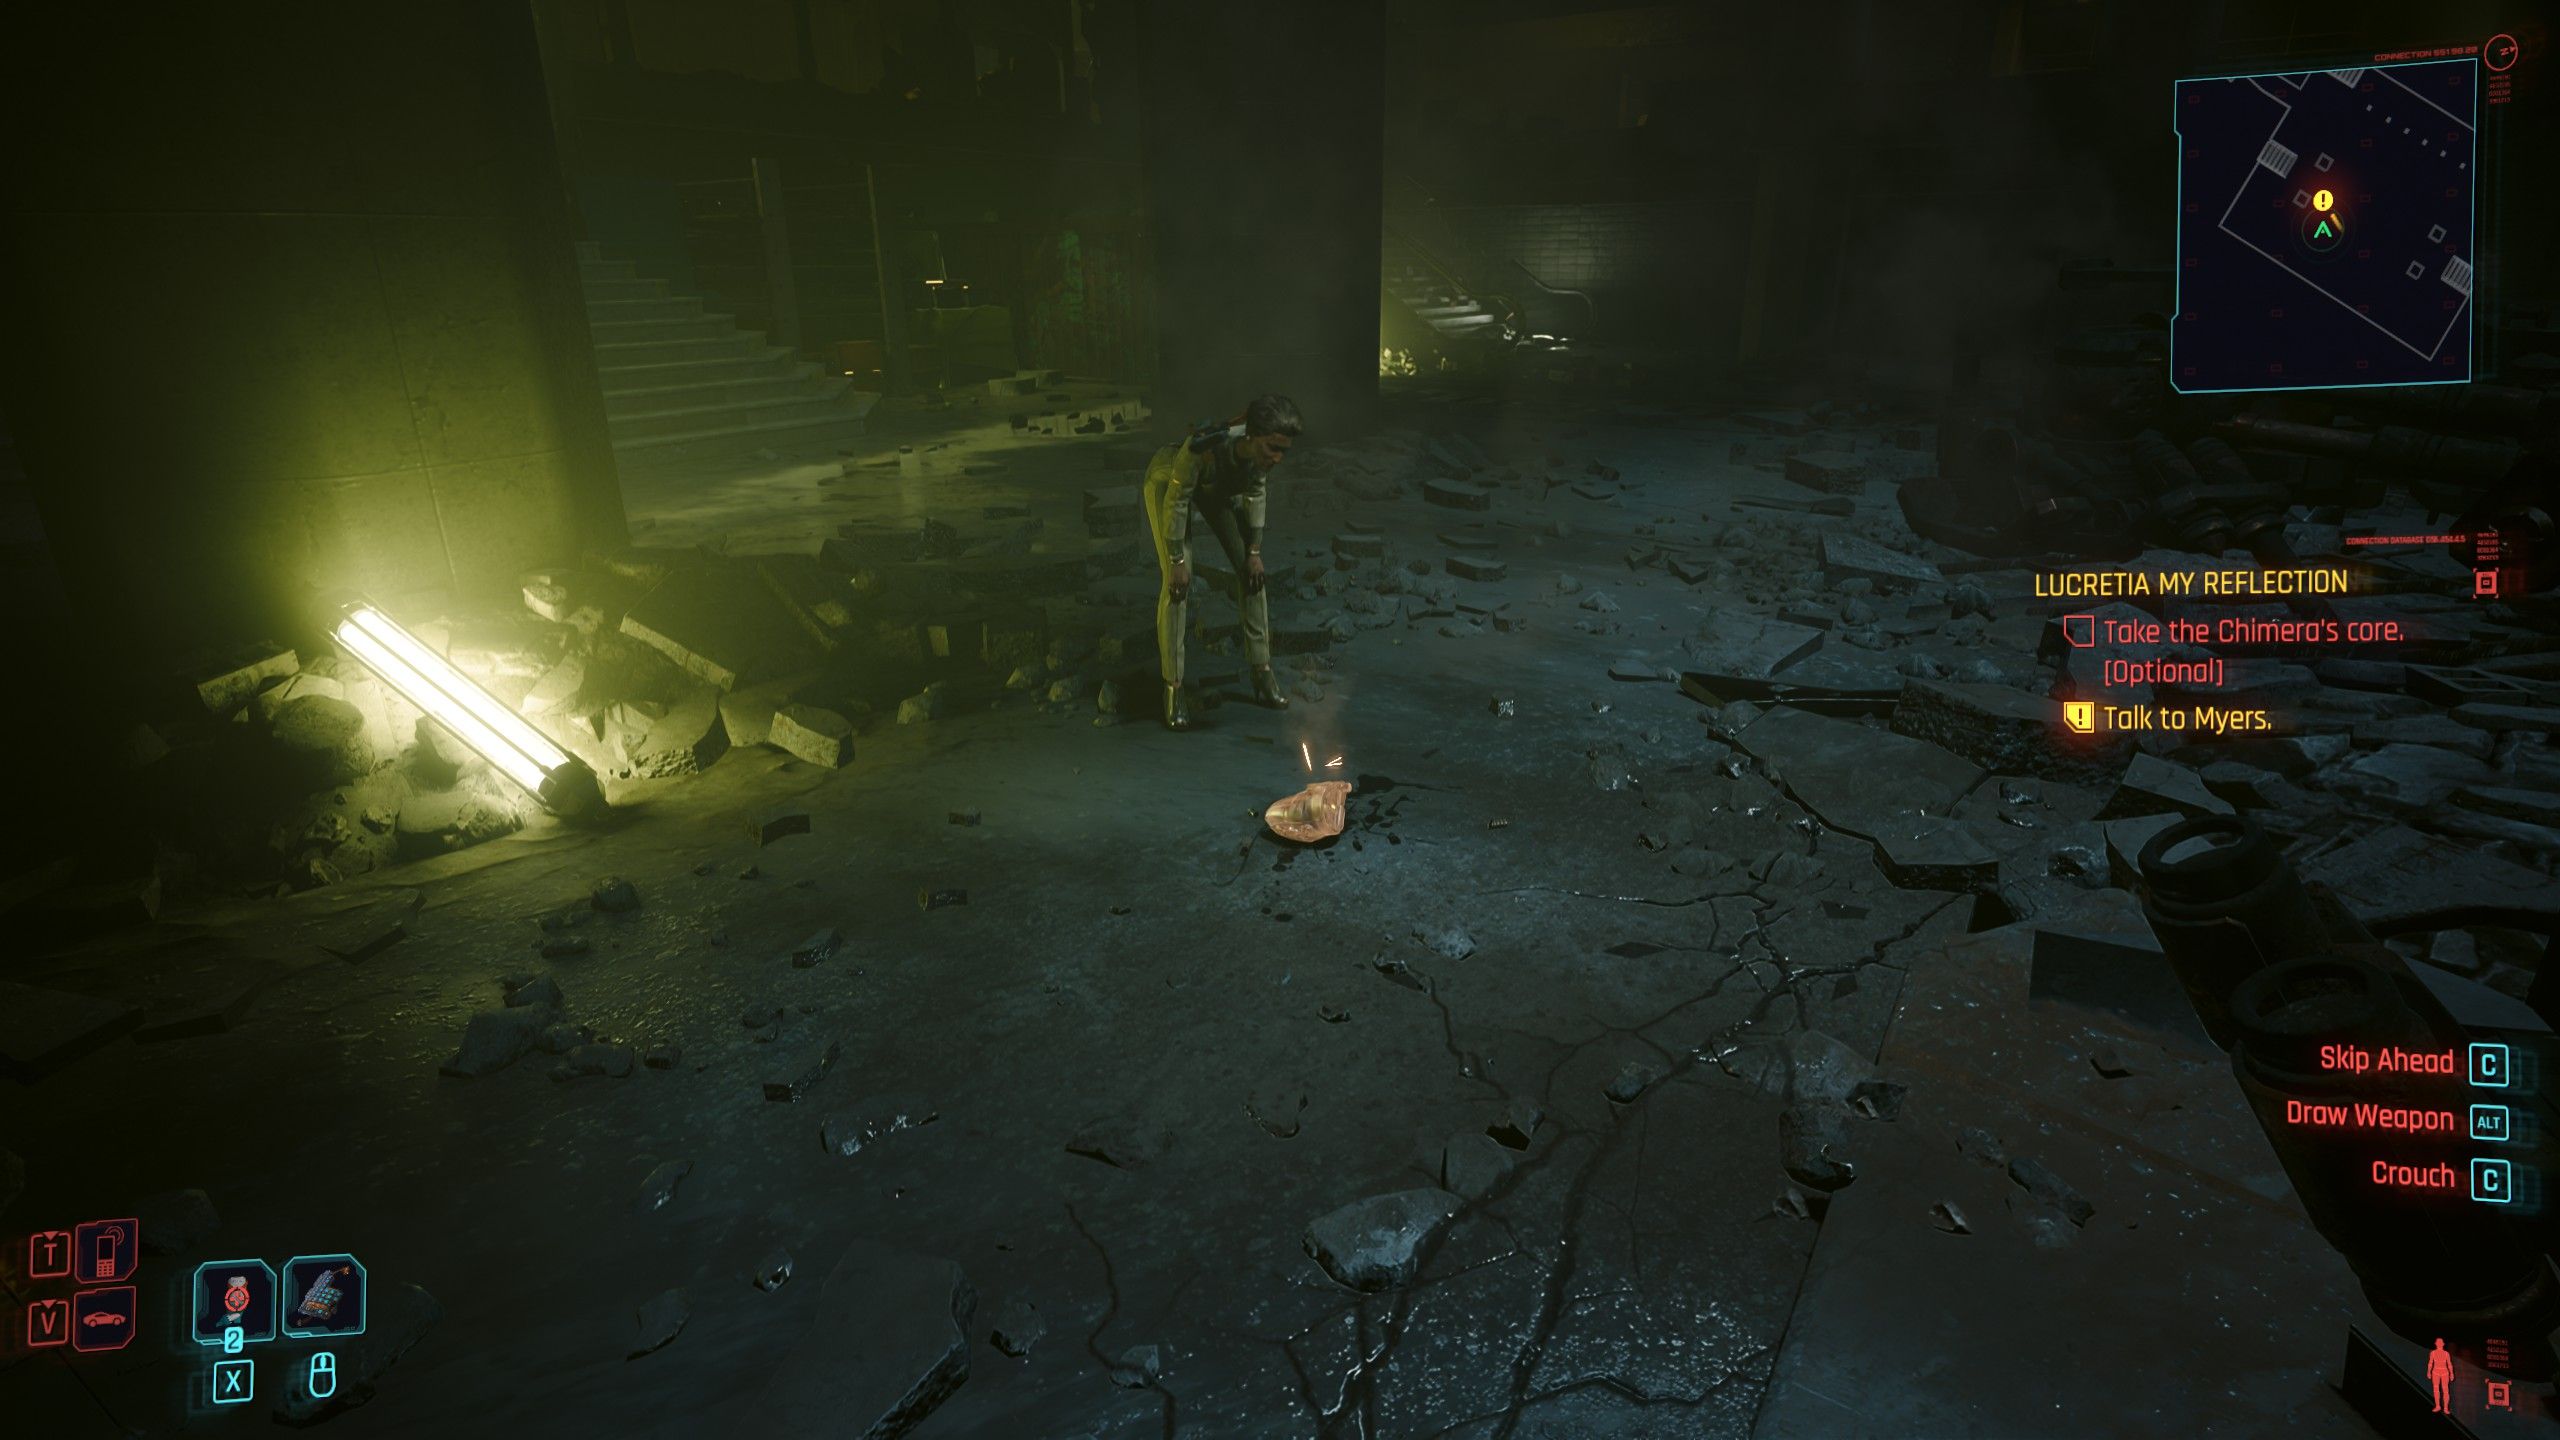 Cyberpunk 2077 Phantom Liberty V Looking At President Myers And Active Chimera Core Item In Ruined Building